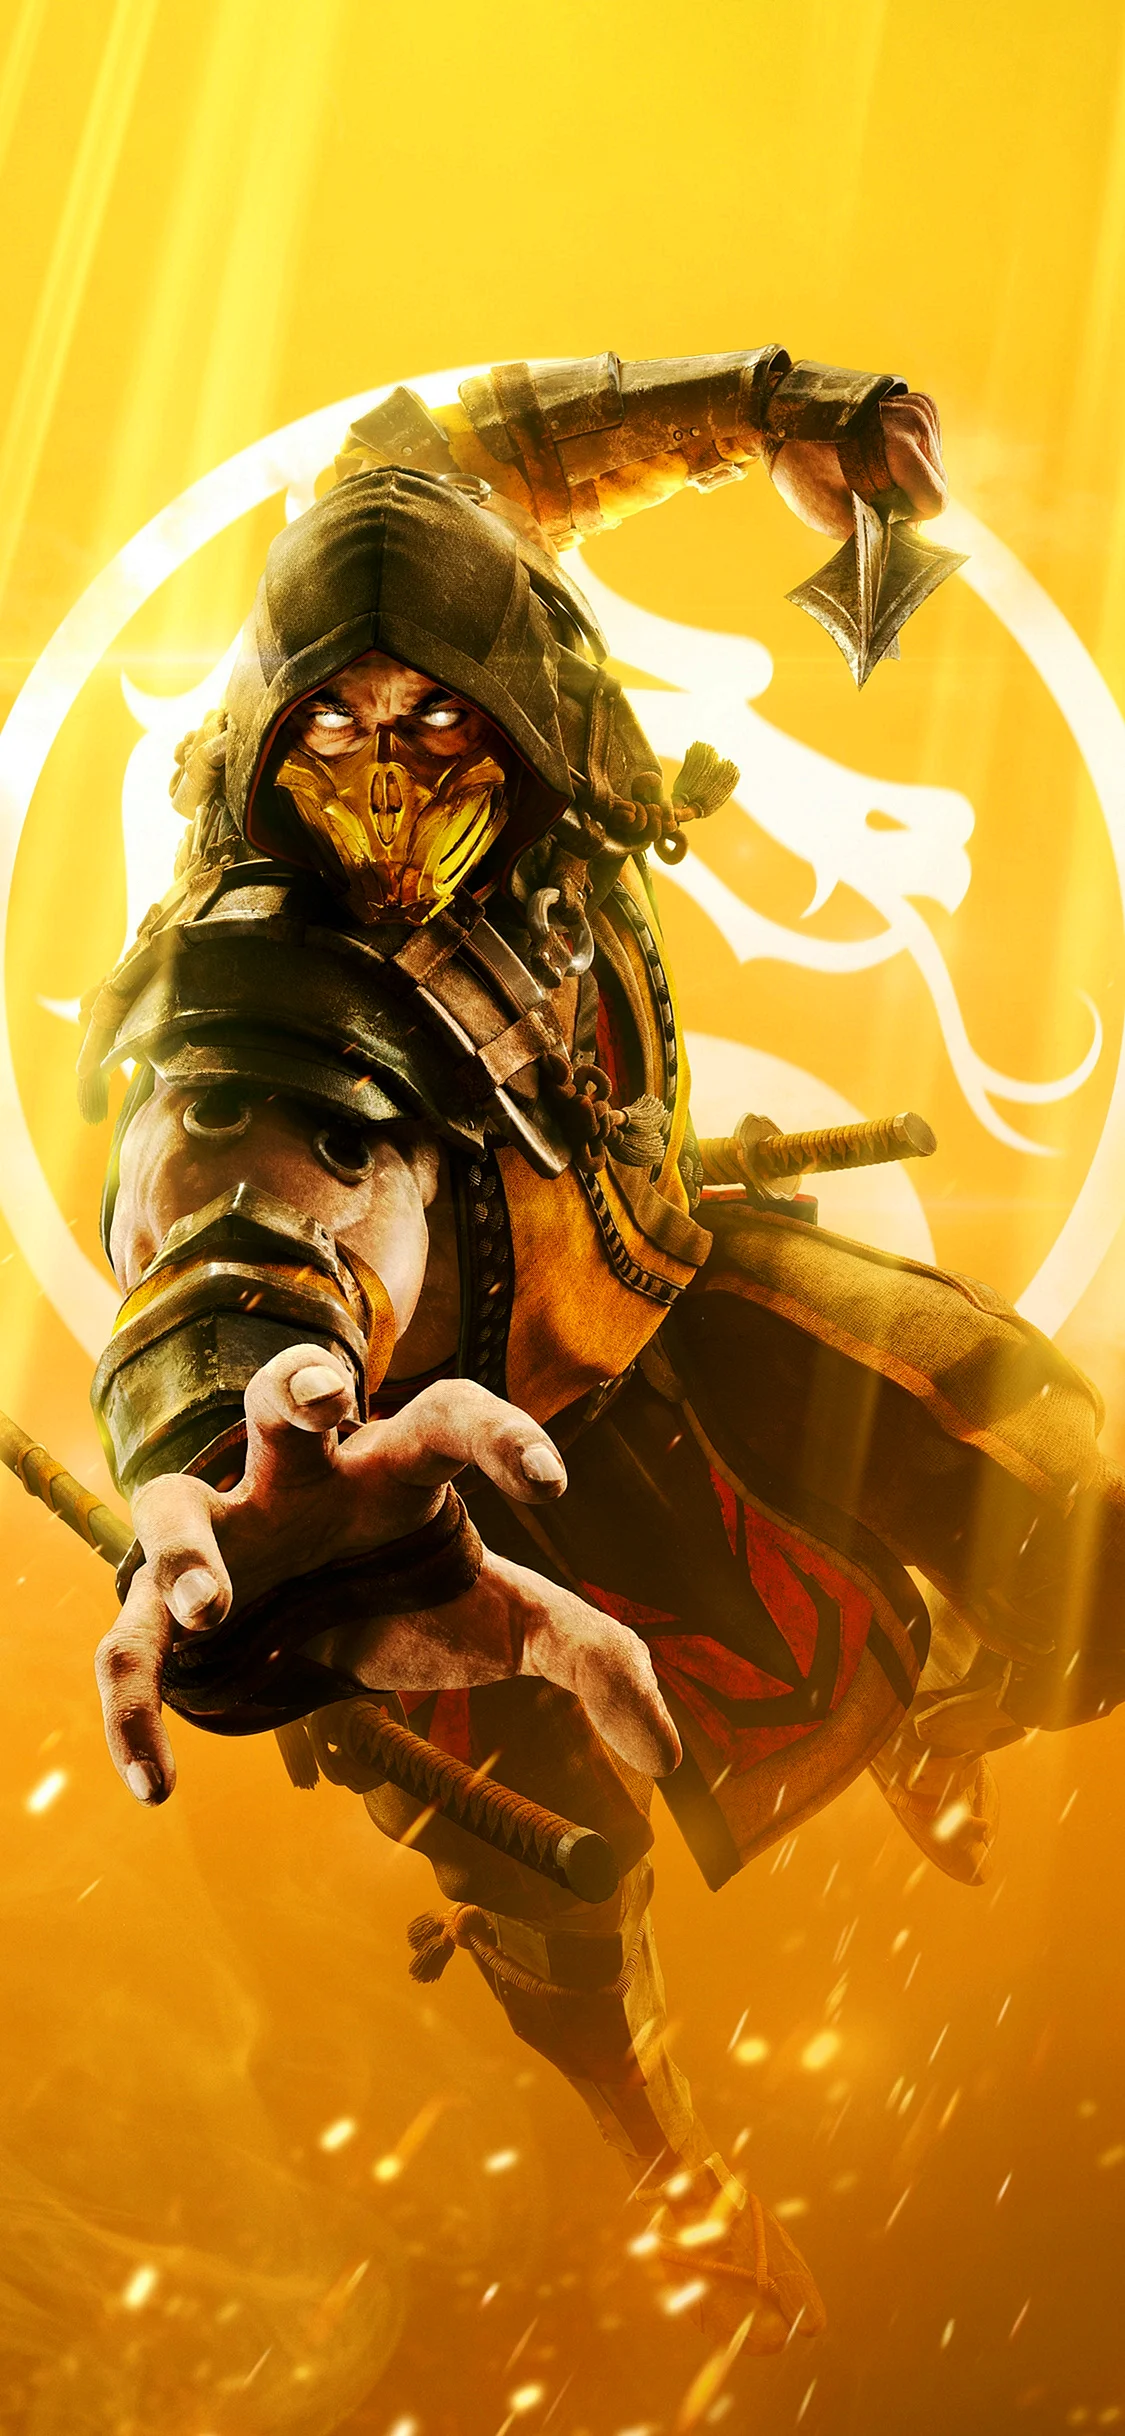 Mk11 Wallpaper for iPhone 11 Pro